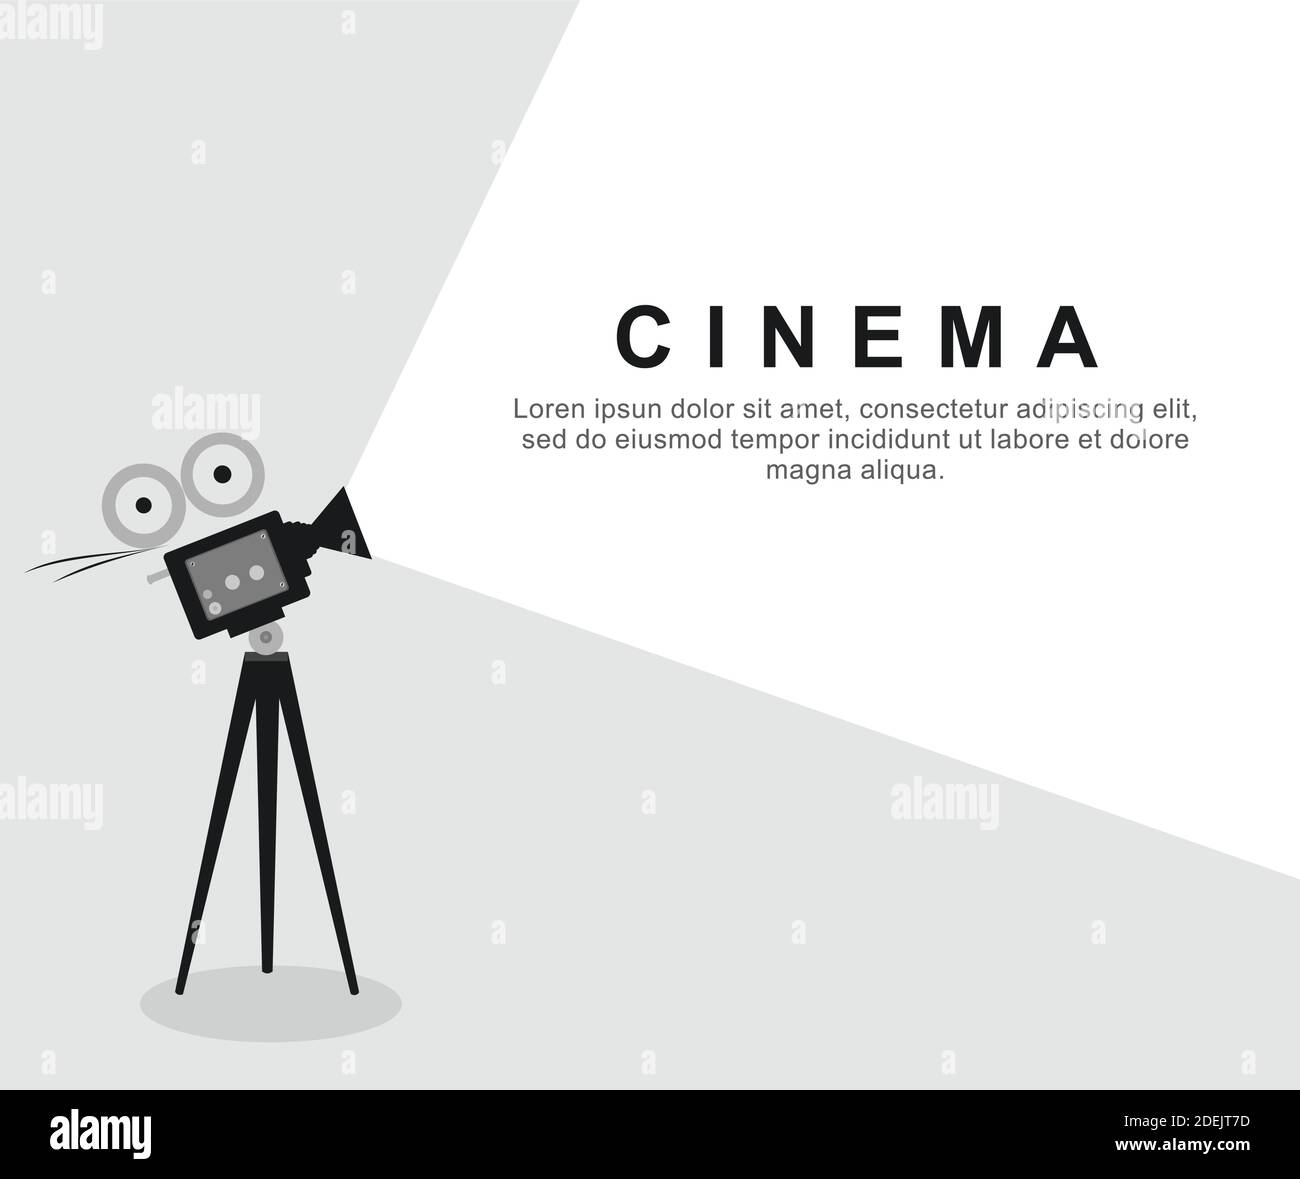 design about cinema background Stock Vector